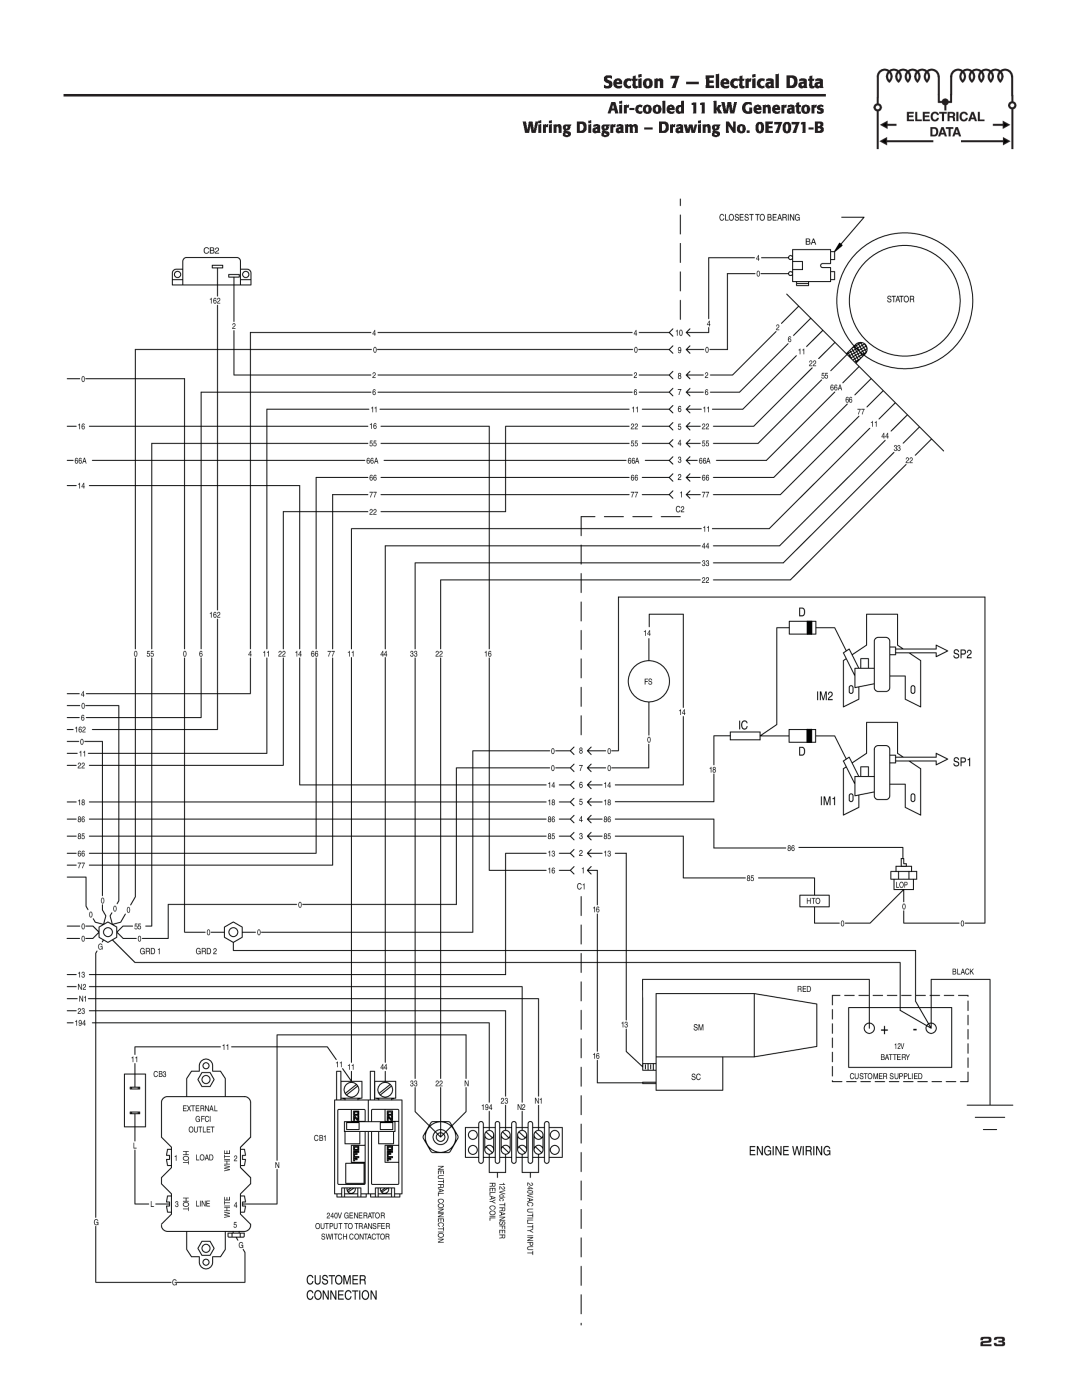 Generac Power Systems 004916-0 Electrical Data, Air-cooled 11 kW Generators Wiring Diagram - Drawing No. 0E7071-B, SP2 IM2 